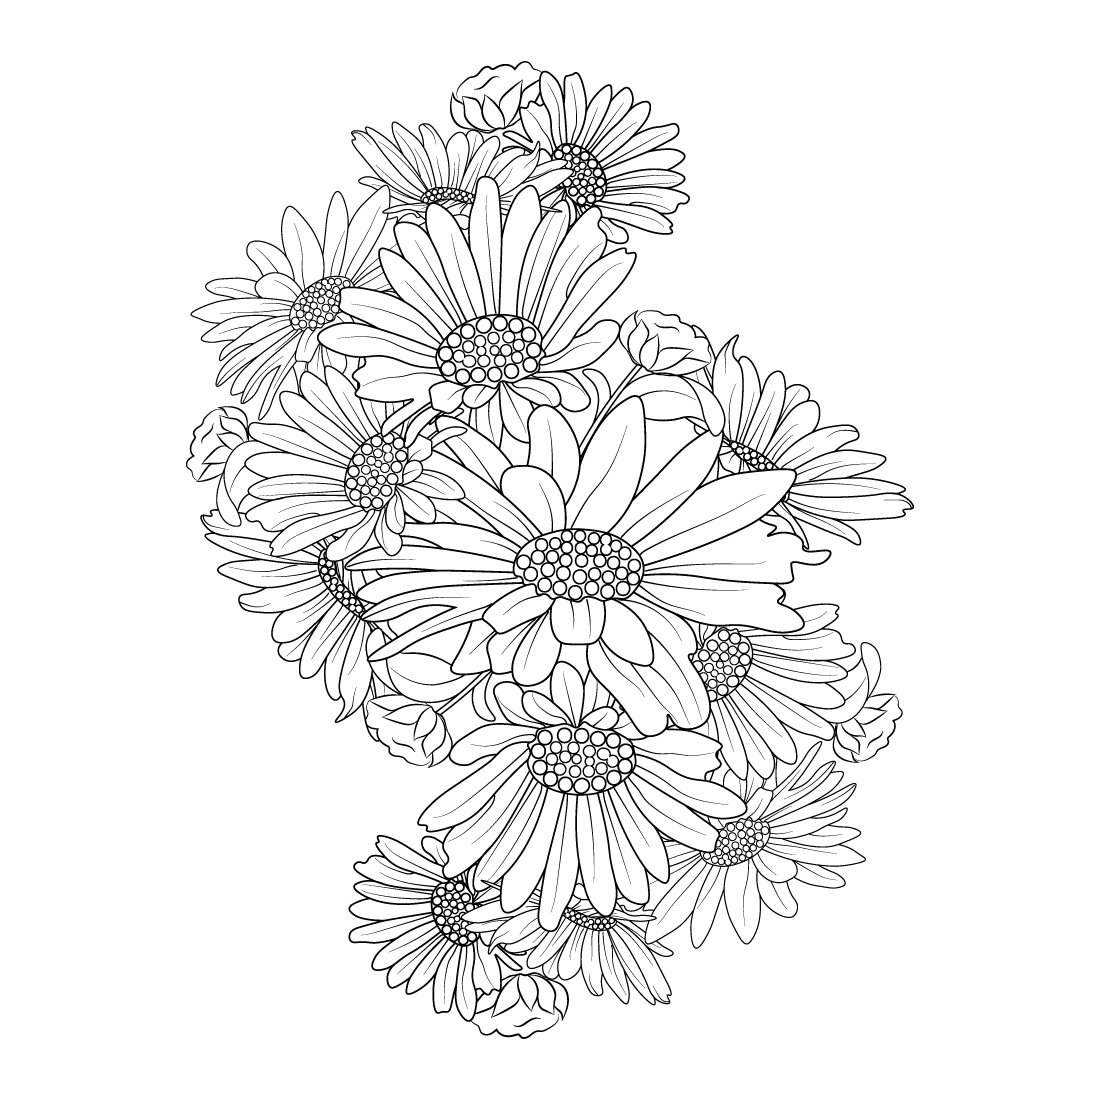 zentangle tattoo design with daisy flowers, relaxation flower coloring pages for adults, cover image.